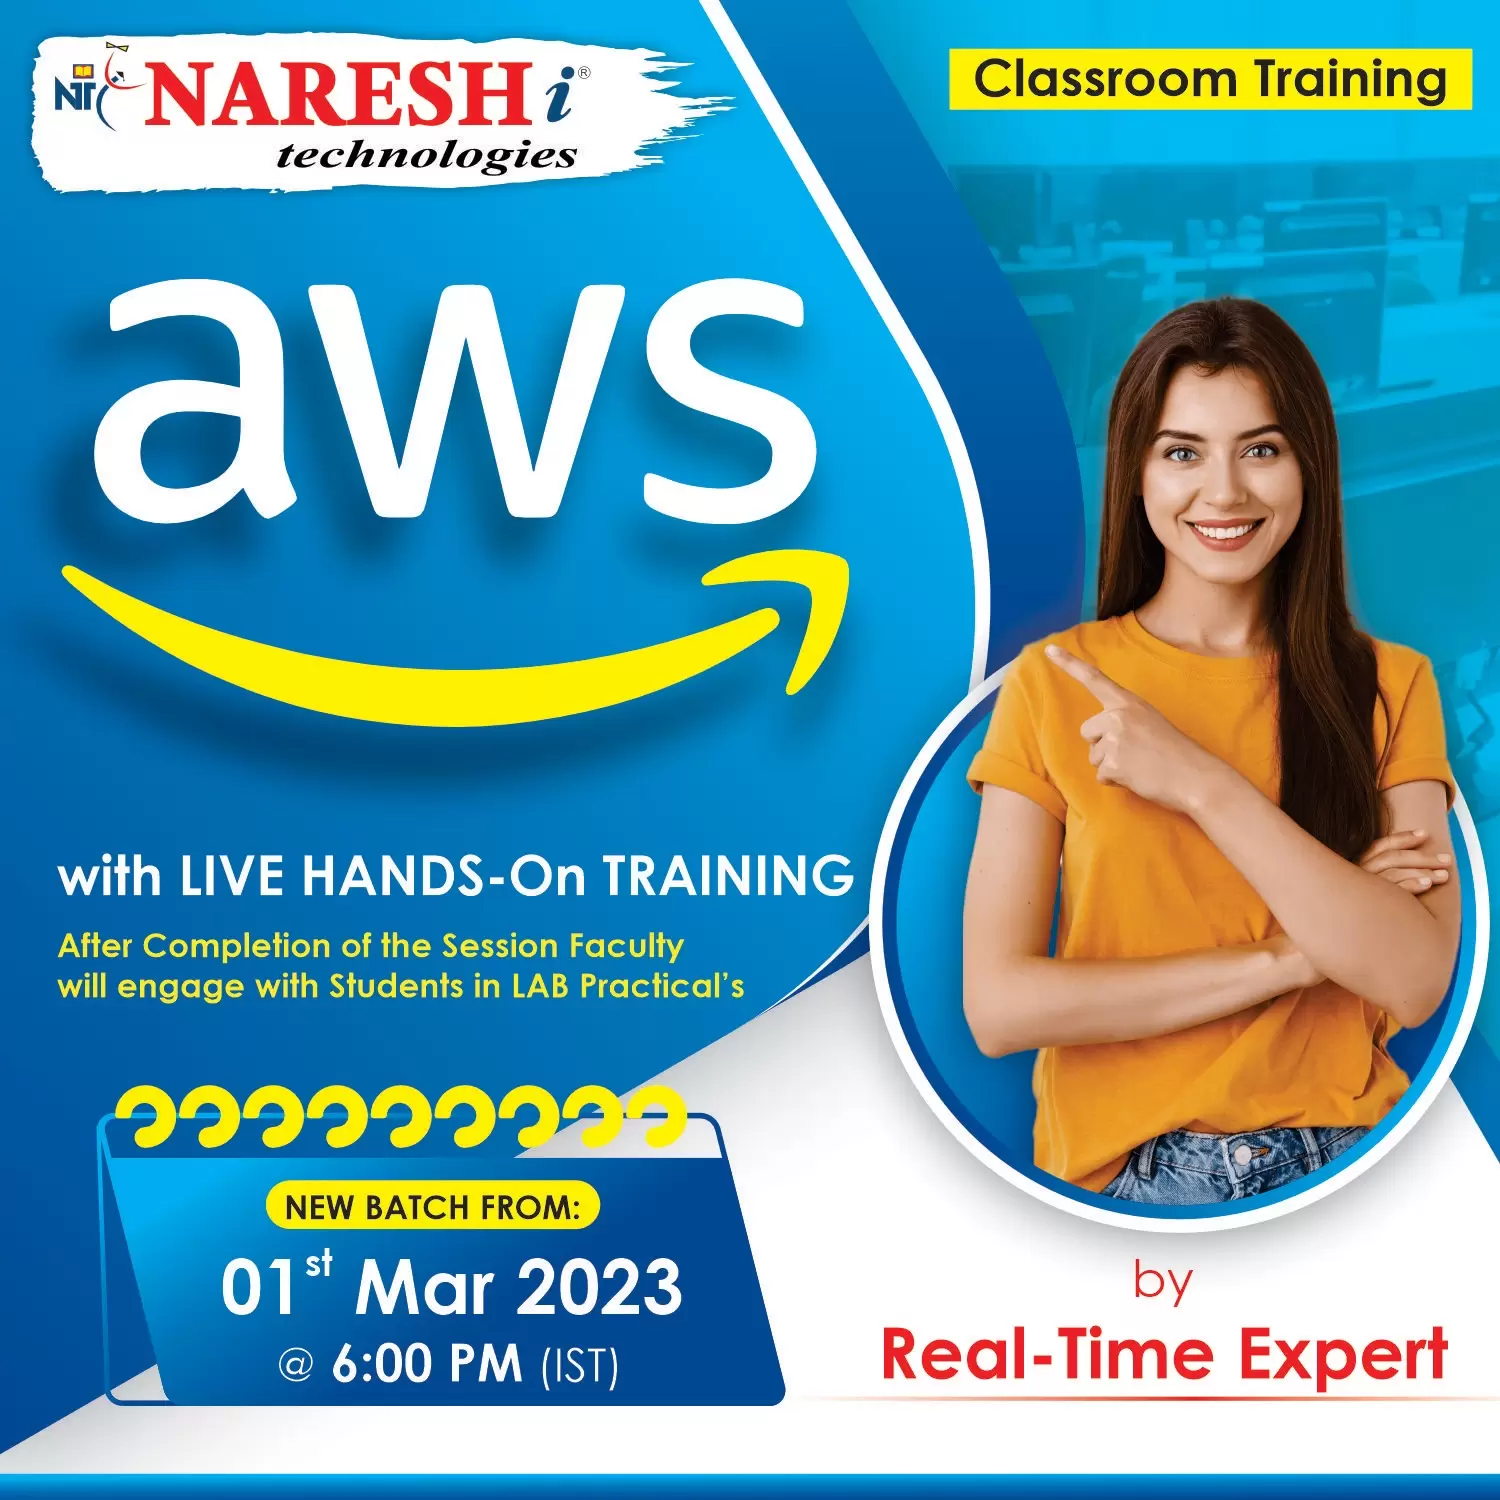 Free Demo On AWS By Real-time Expert - NareshIT